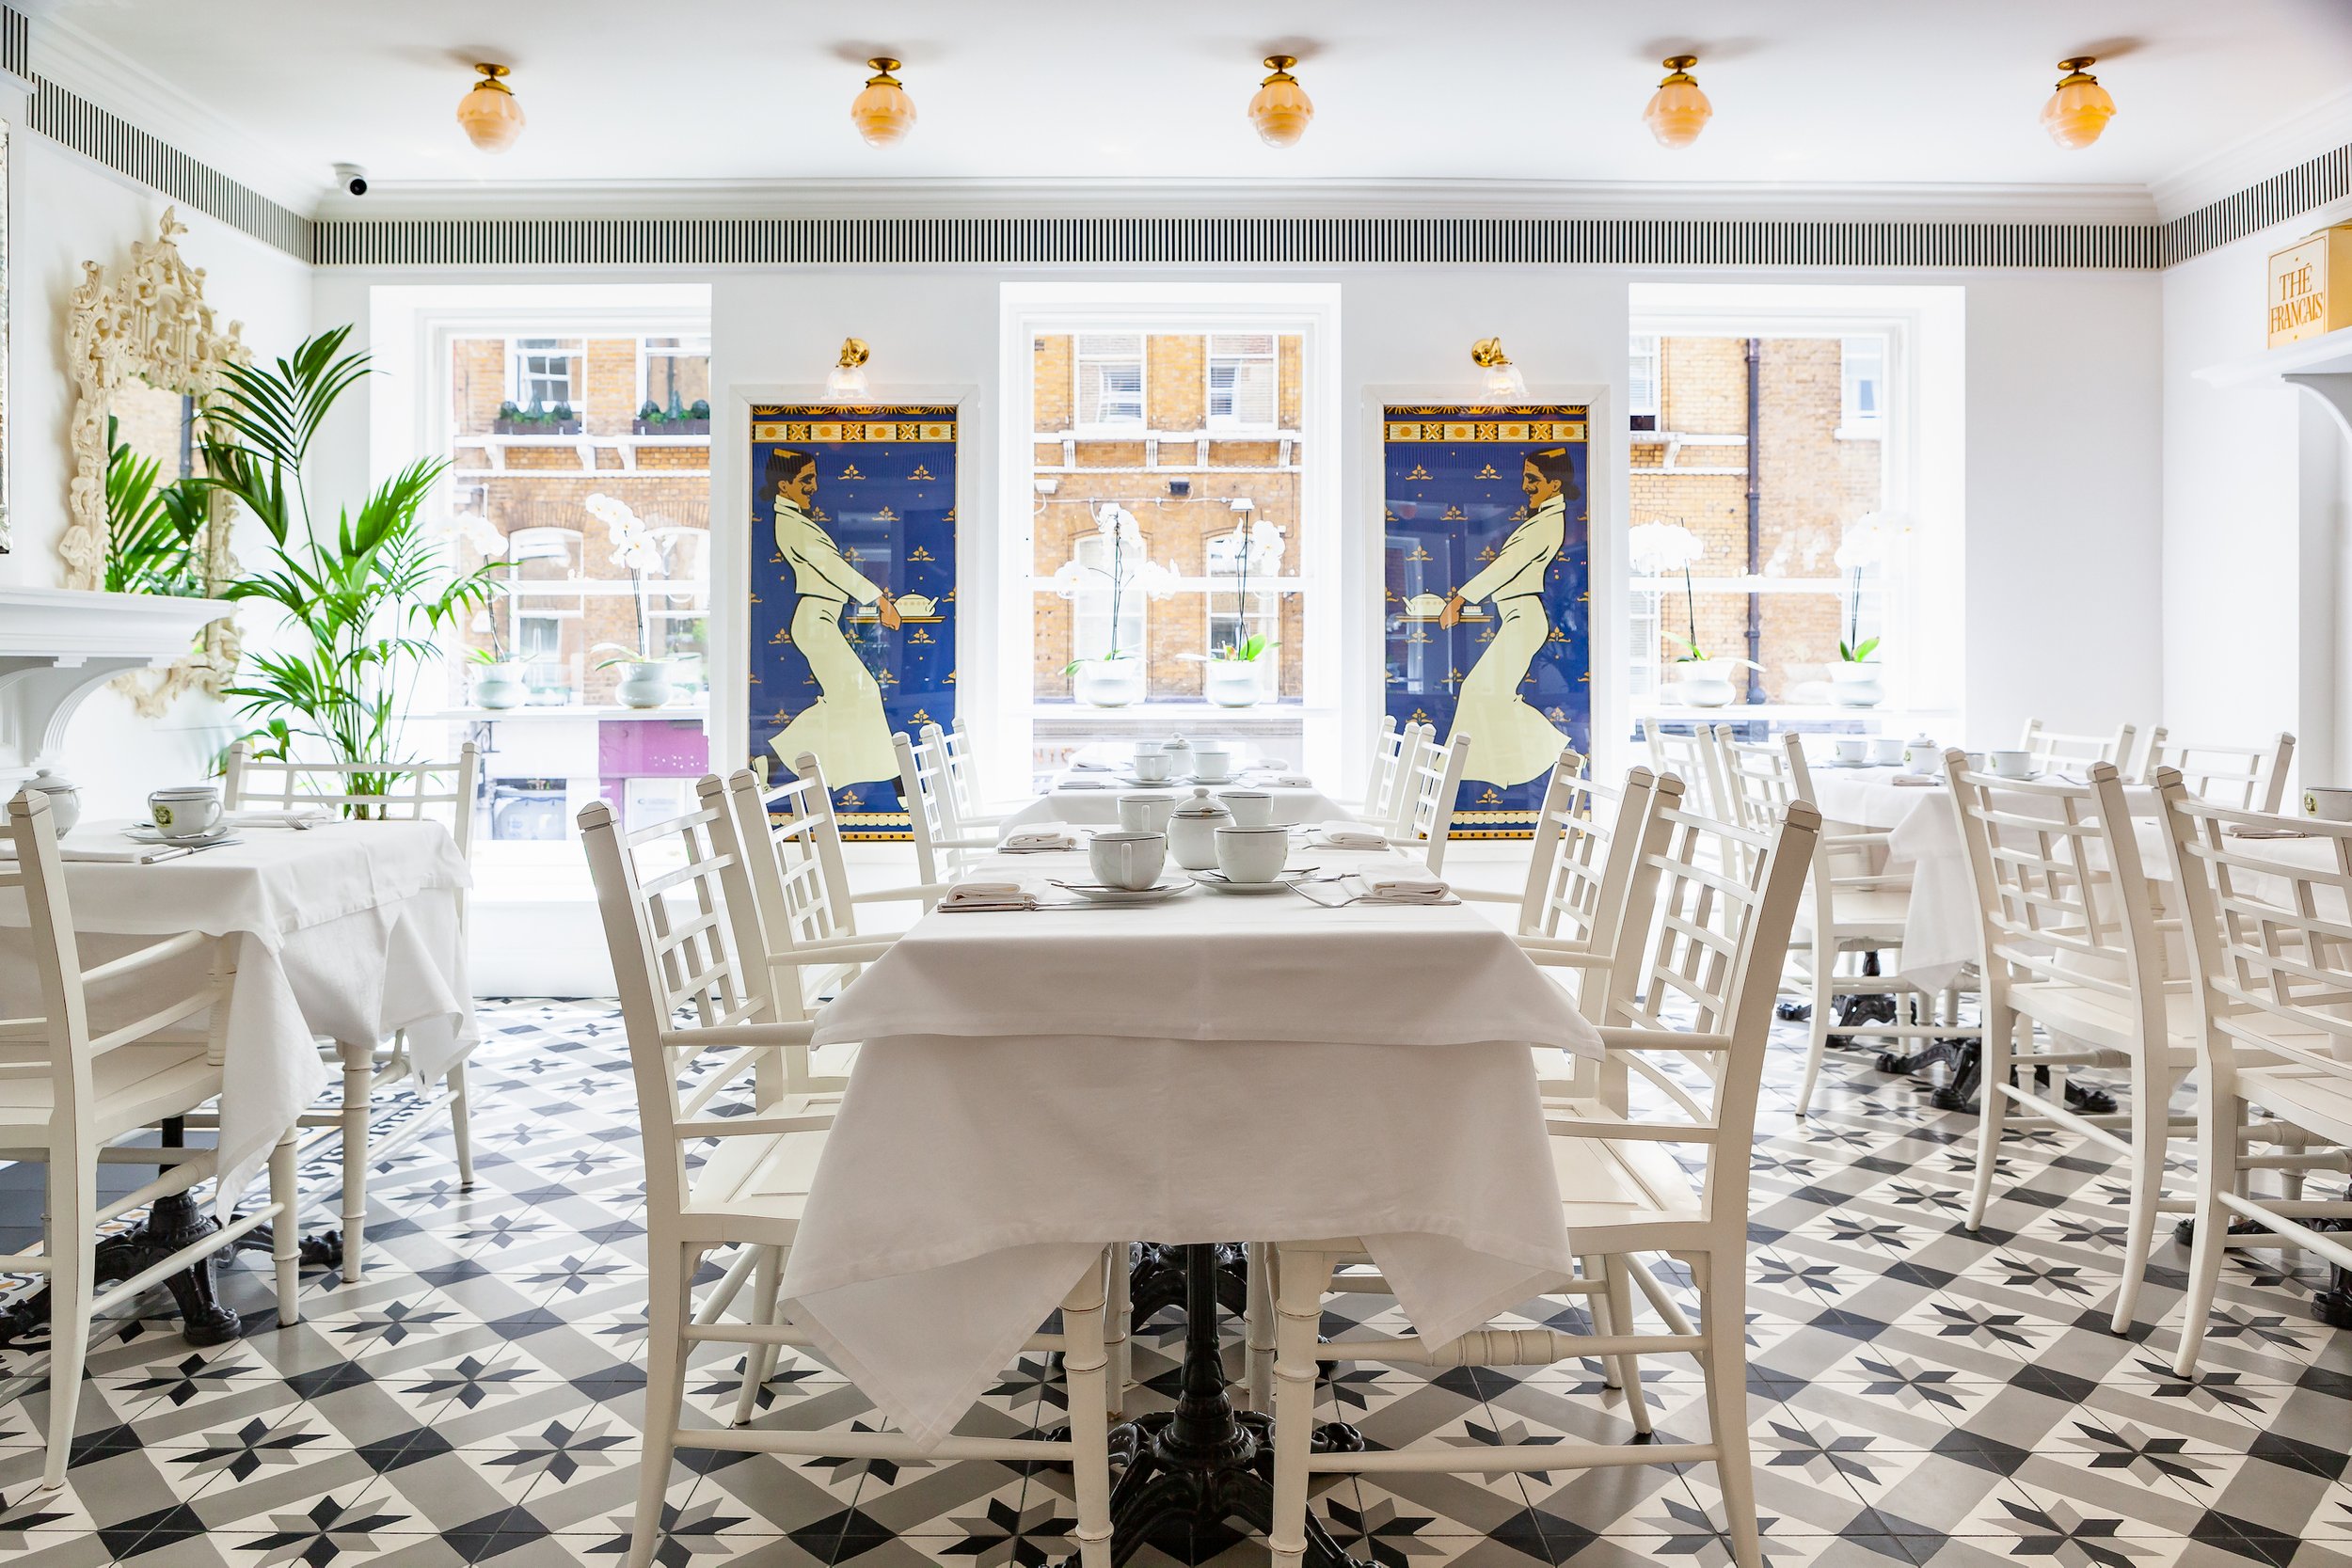 Mariage Frères: The Tea-Inspired Restaurant And Museum In Covent Garden